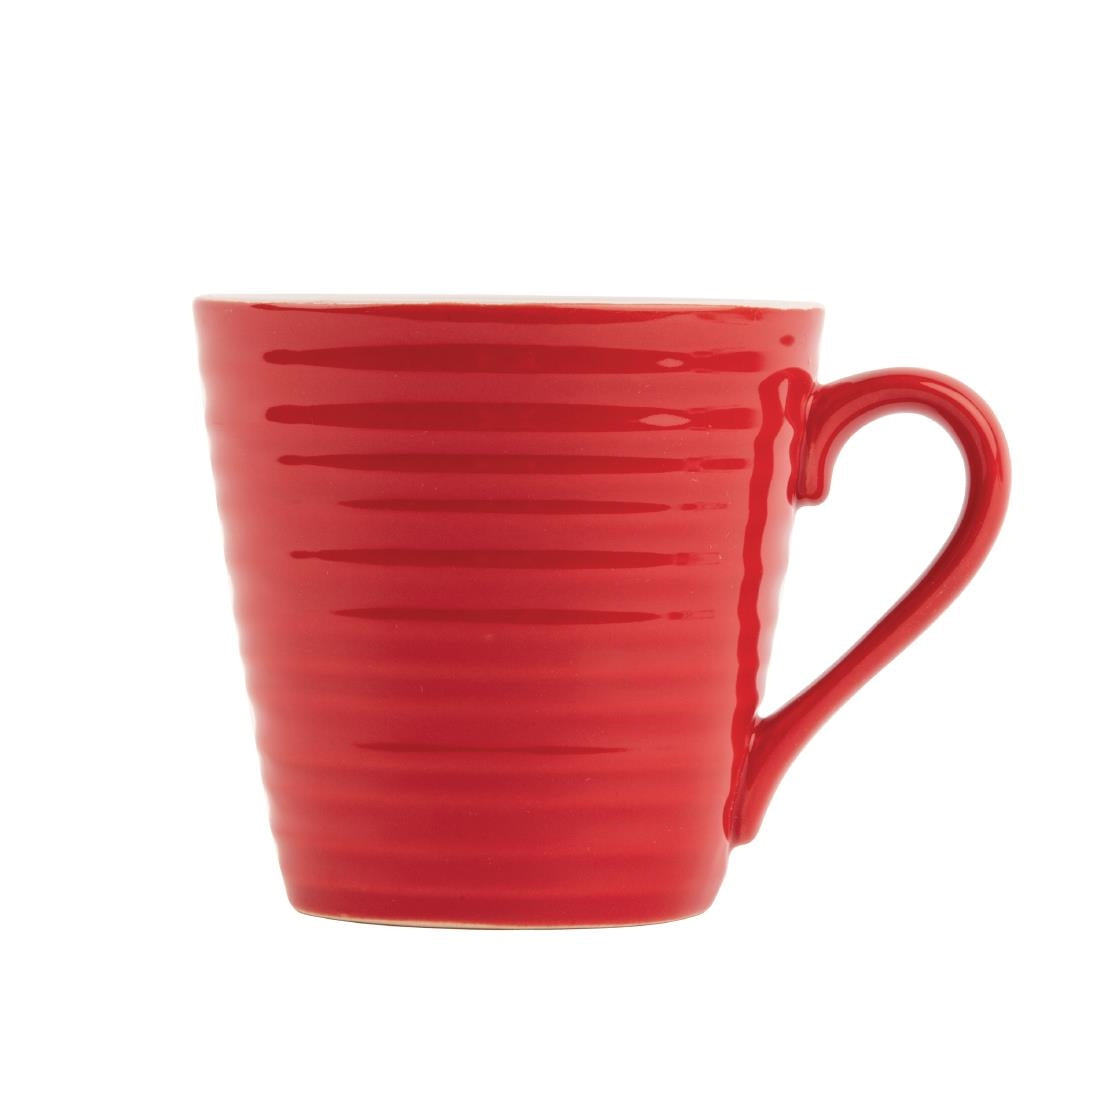 DH632 Olympia CafÃ© Aroma Mugs Red 340ml (Pack of 6)